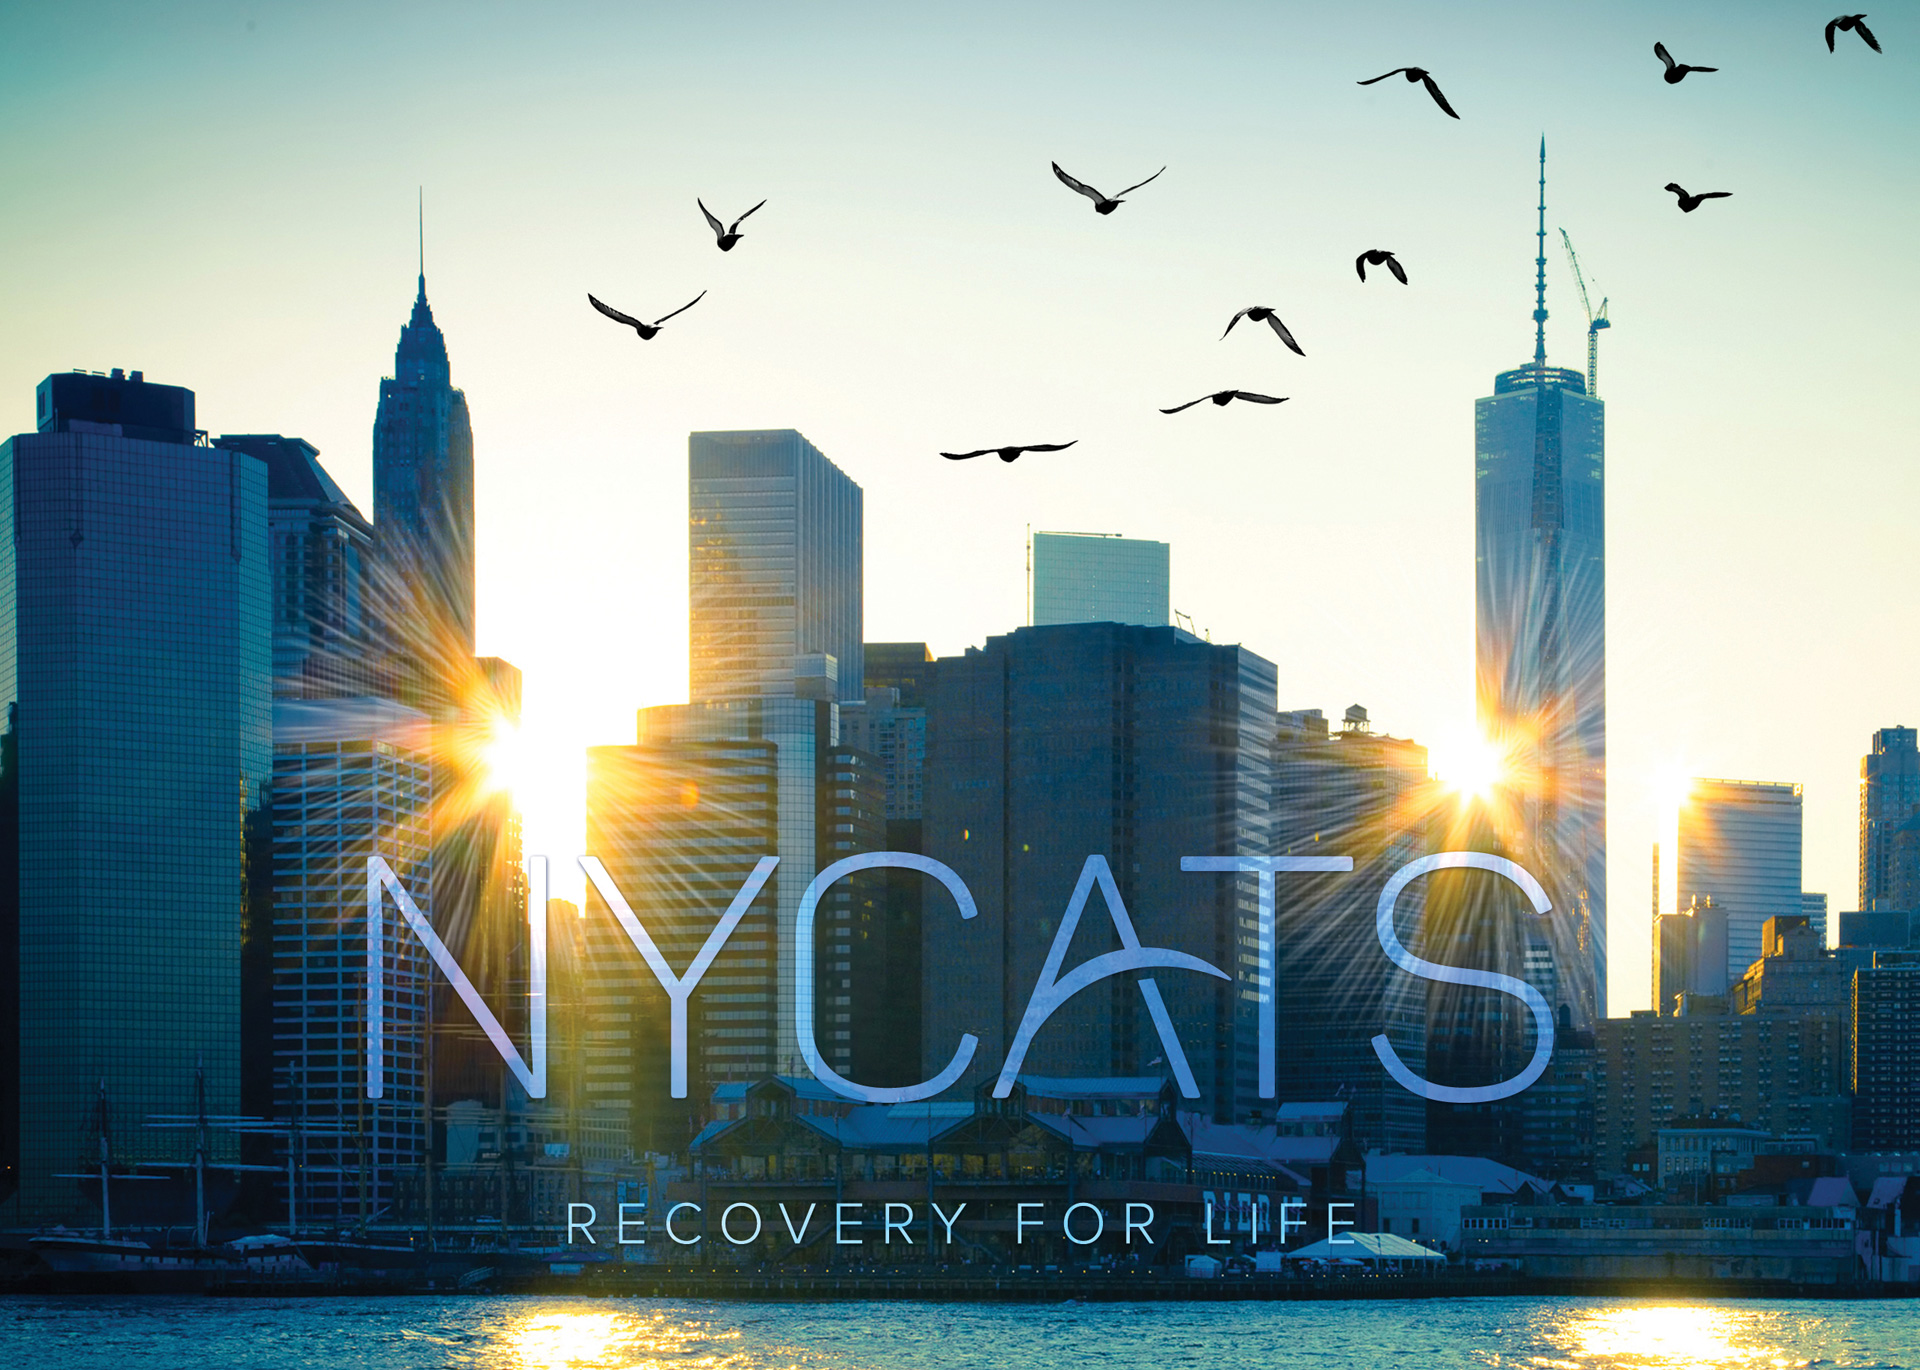 NYCATS Premier Substance Abuse Center